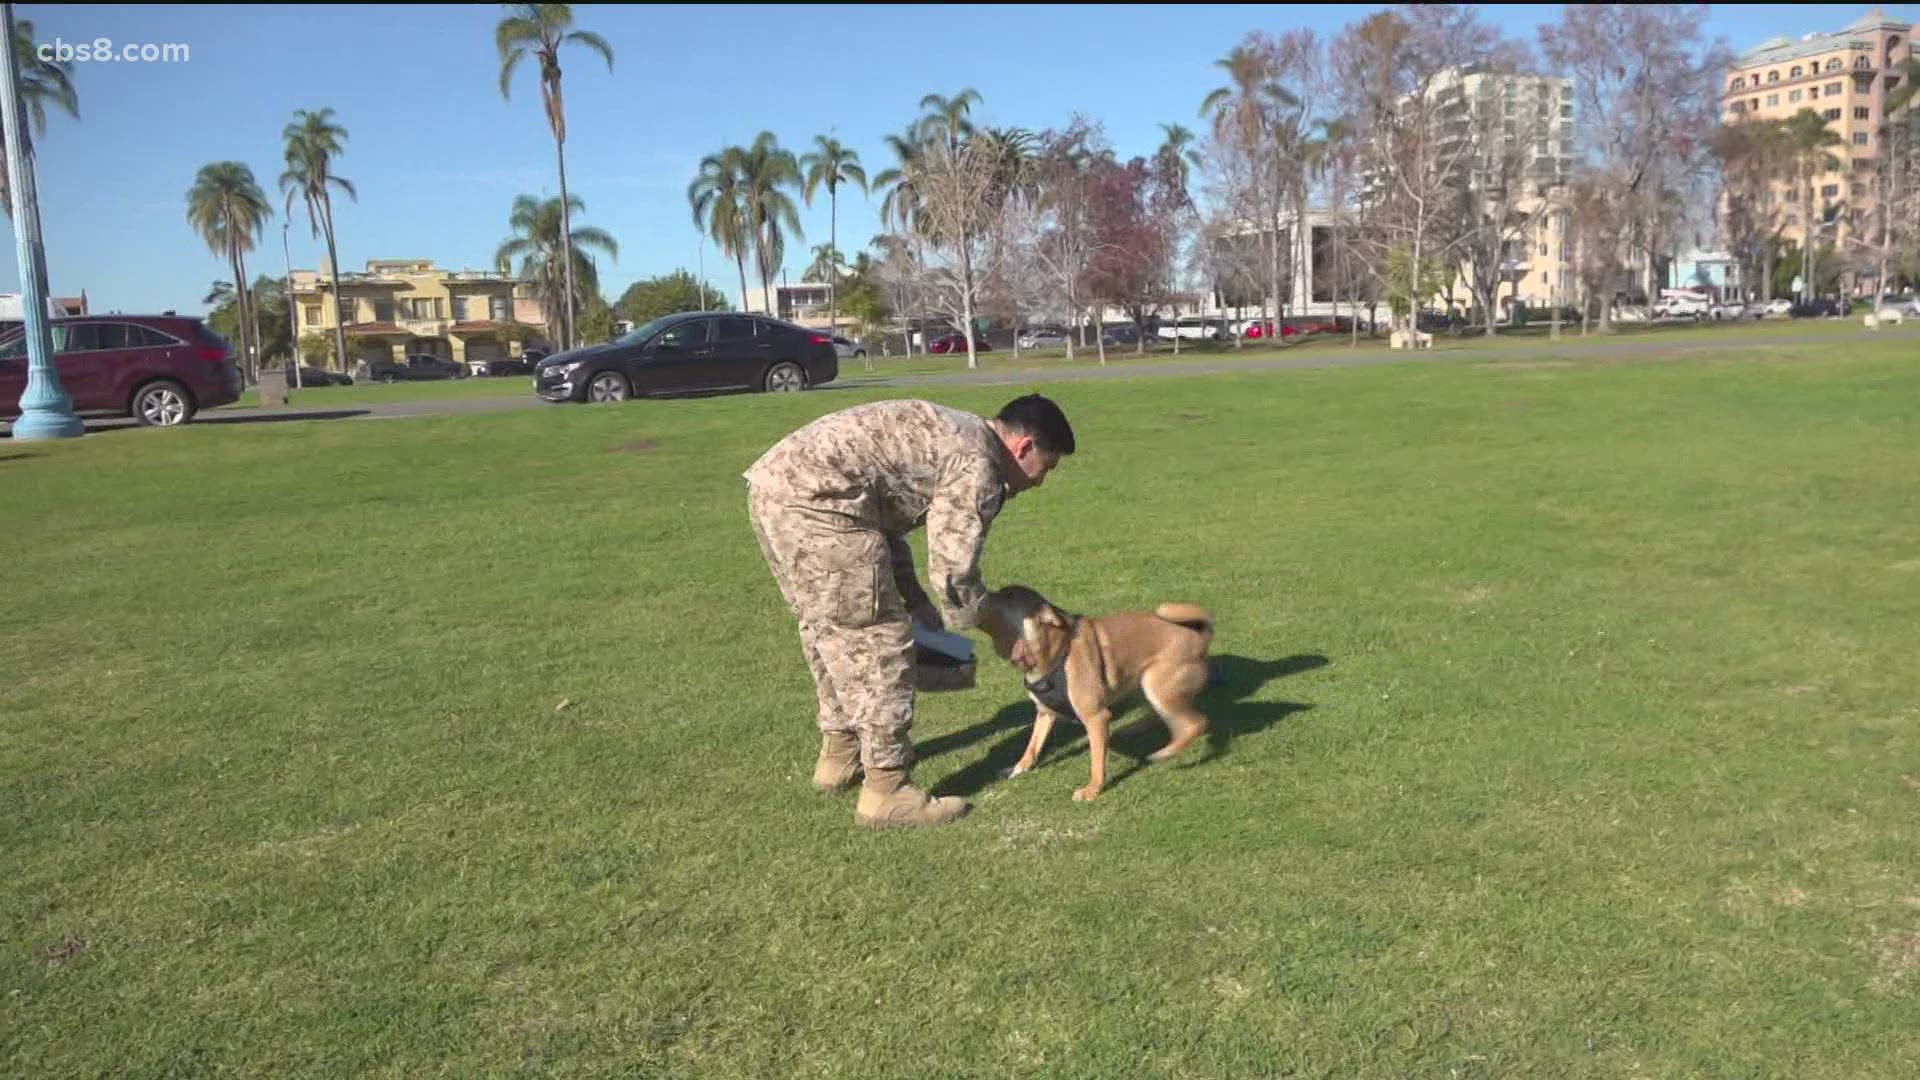 The dog was being watched by San Diego based non-profit "Dogs on Deployment."